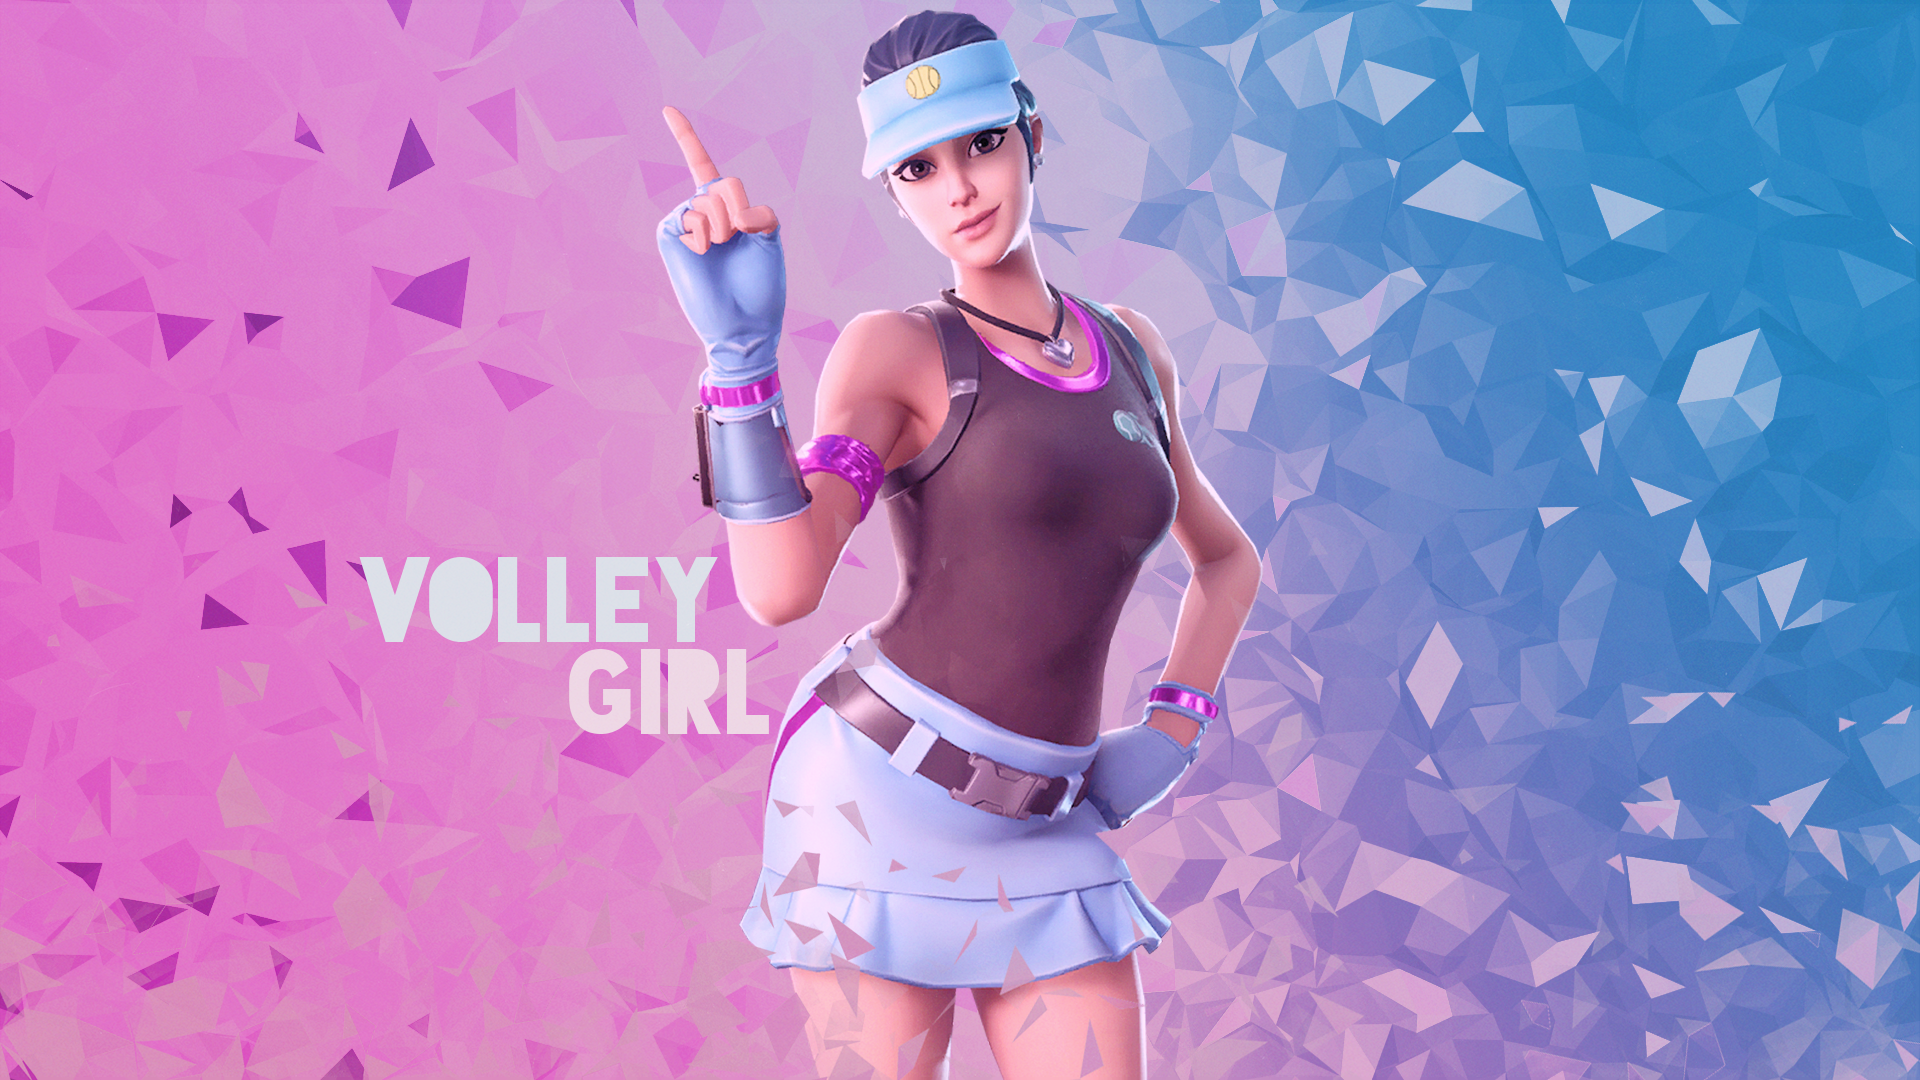 I missed getting this skin but I figured I'd make a Volley Girl wallpaper too